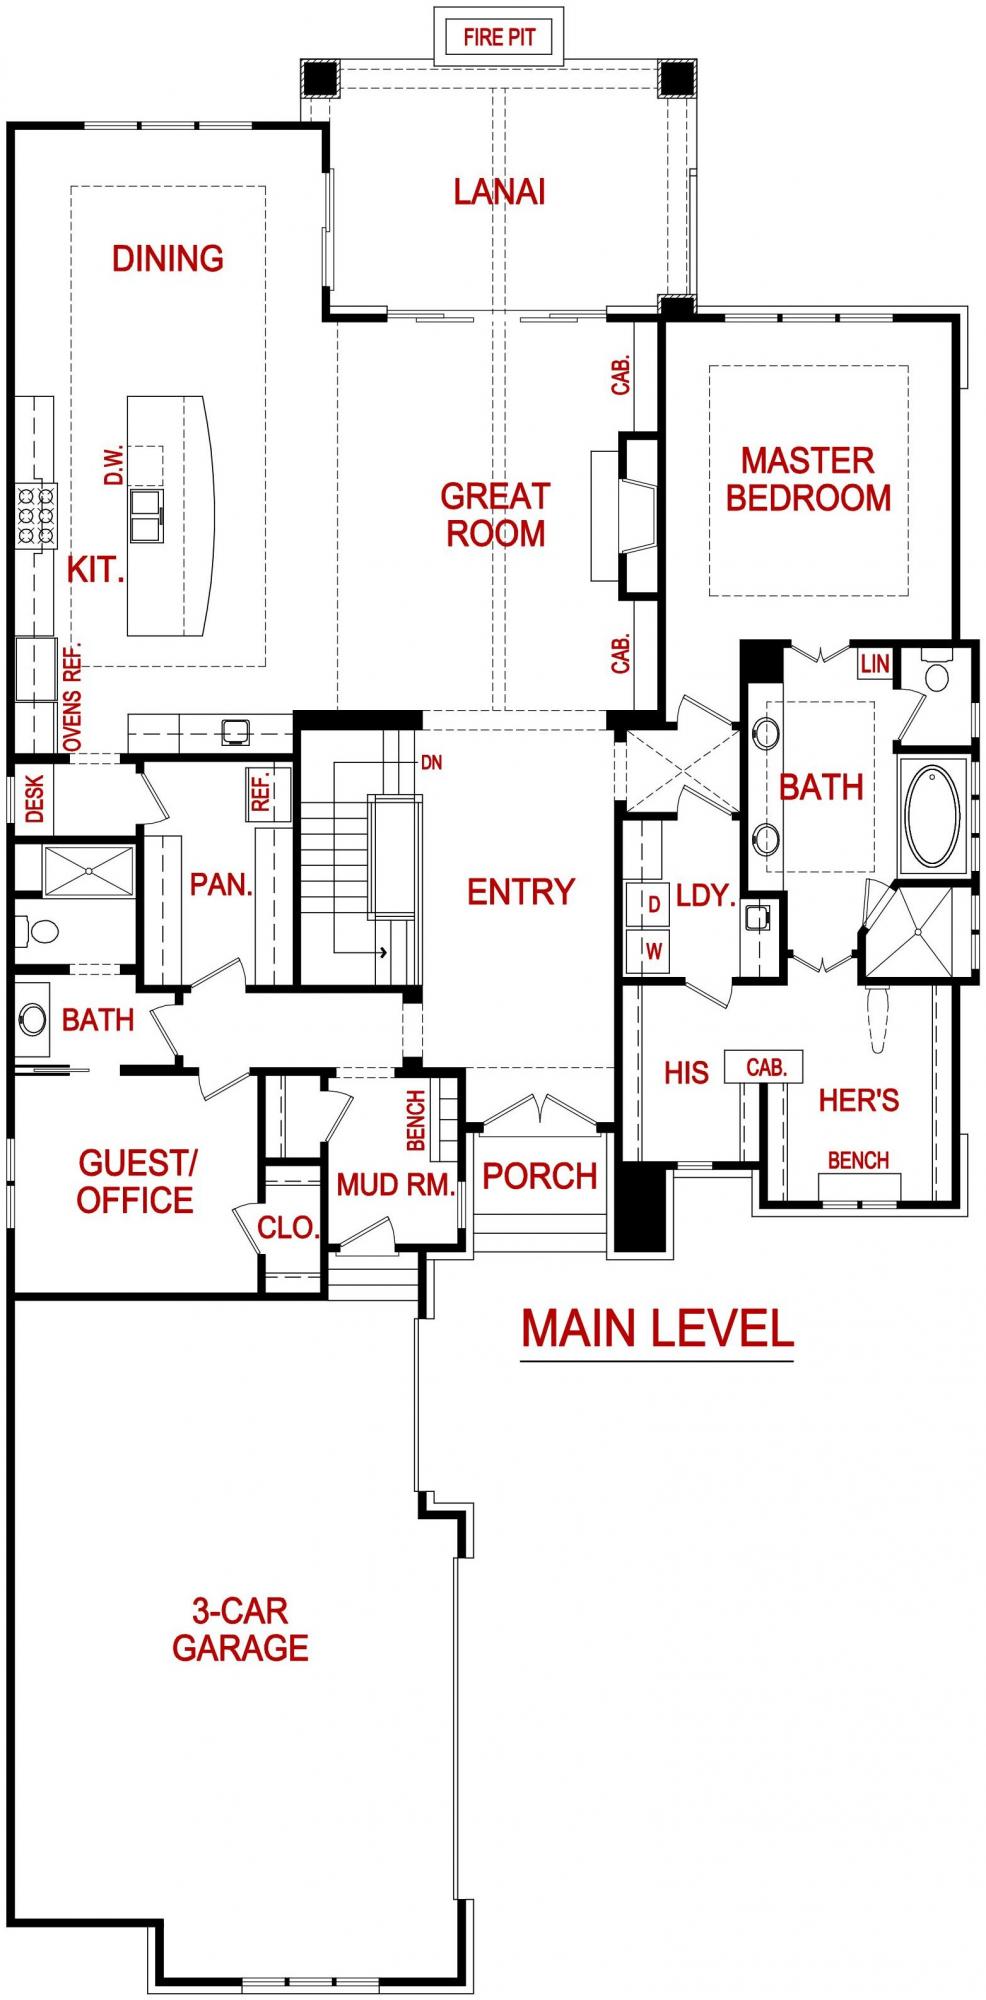 Main level floor plan of a Peachtree model from Lambie Custom Homes